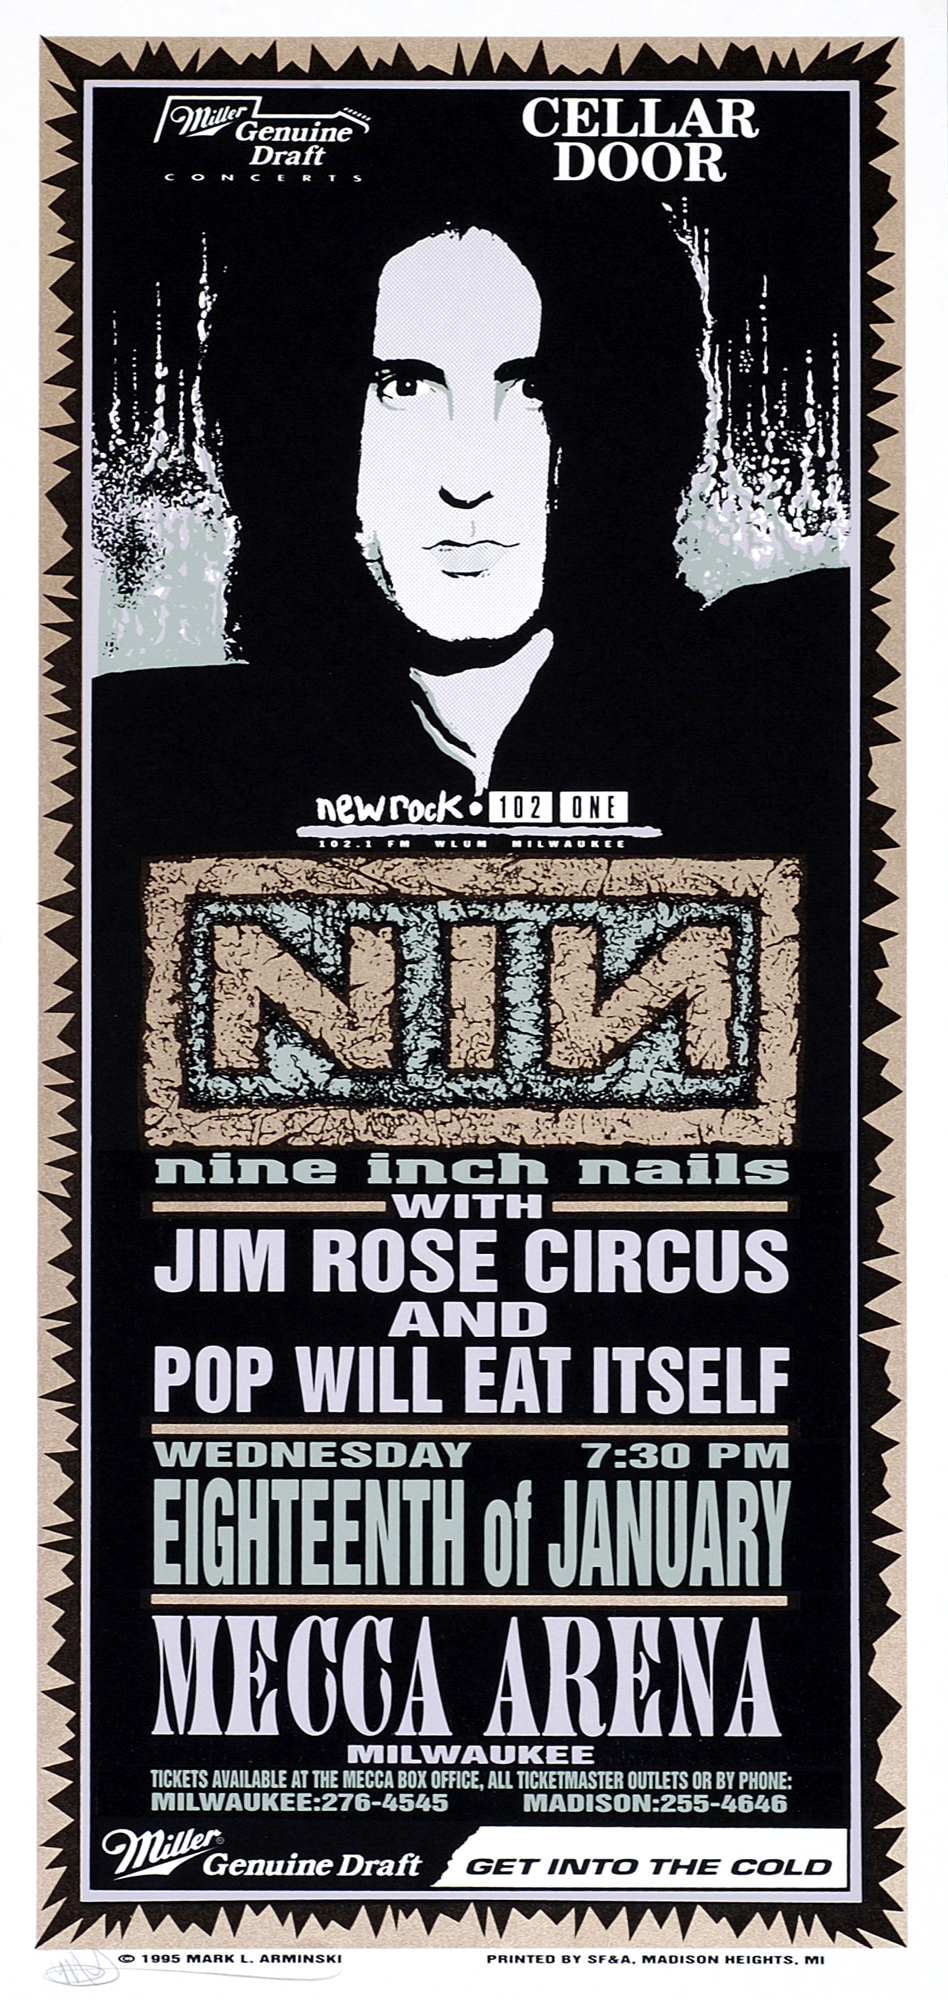 <a href='https://www.ebay.com/sch/i.html?_from=R40&_trksid=p2323012.m570.l1313&_nkw=Nine+Inch+Nails+Poster+Milwaukee&_sacat=0&mkcid=1&mkrid=711-53200-19255-0&siteid=0&campid=5336302525&customid=poster&toolid=10001&mkevt=1'>Buy this Poster!</a>